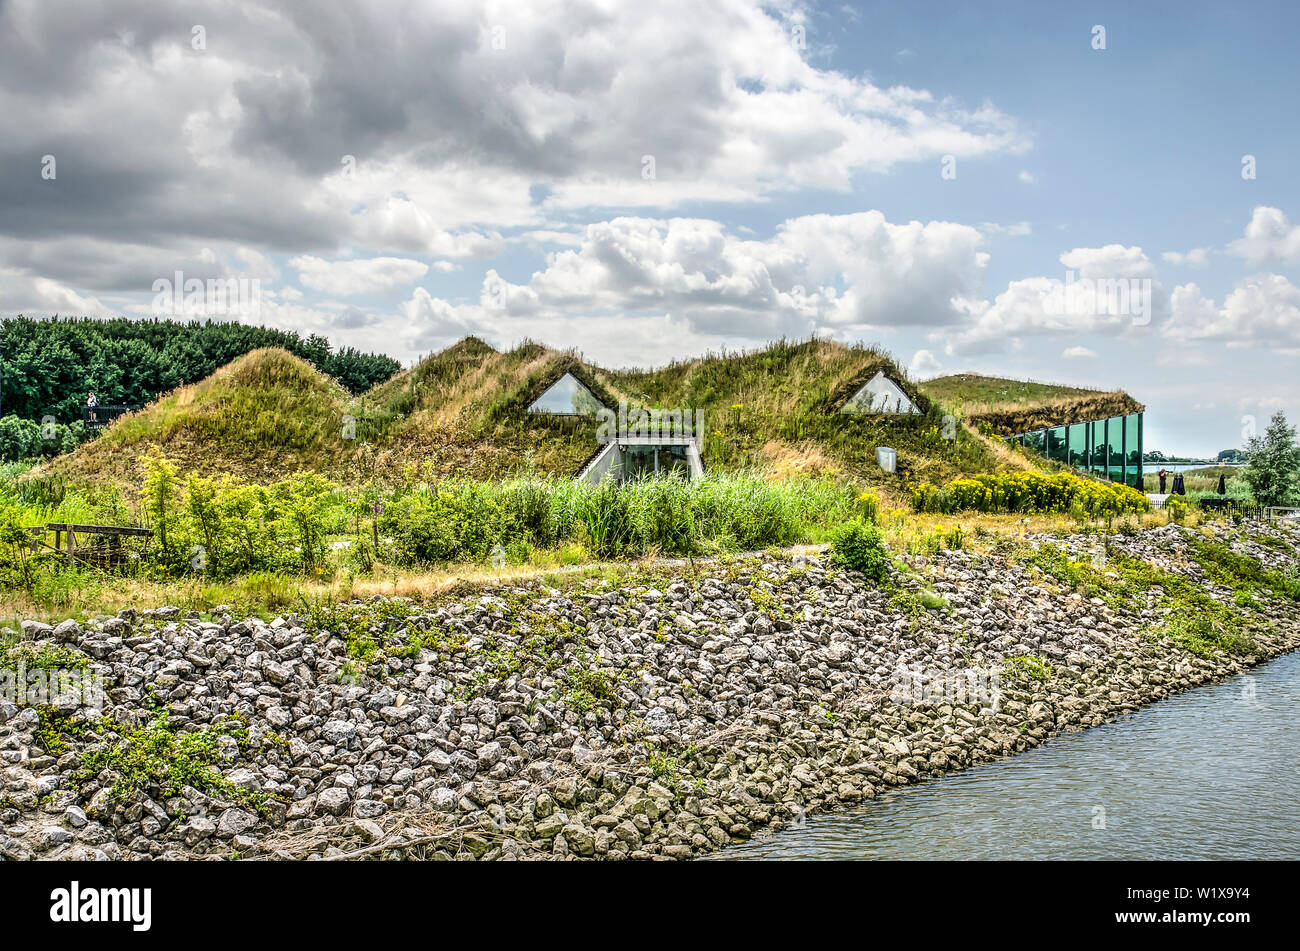 Werkendam, The Netherlands, July 3, 2019: view of the Biesbosch museum on its island in the national park Stock Photo